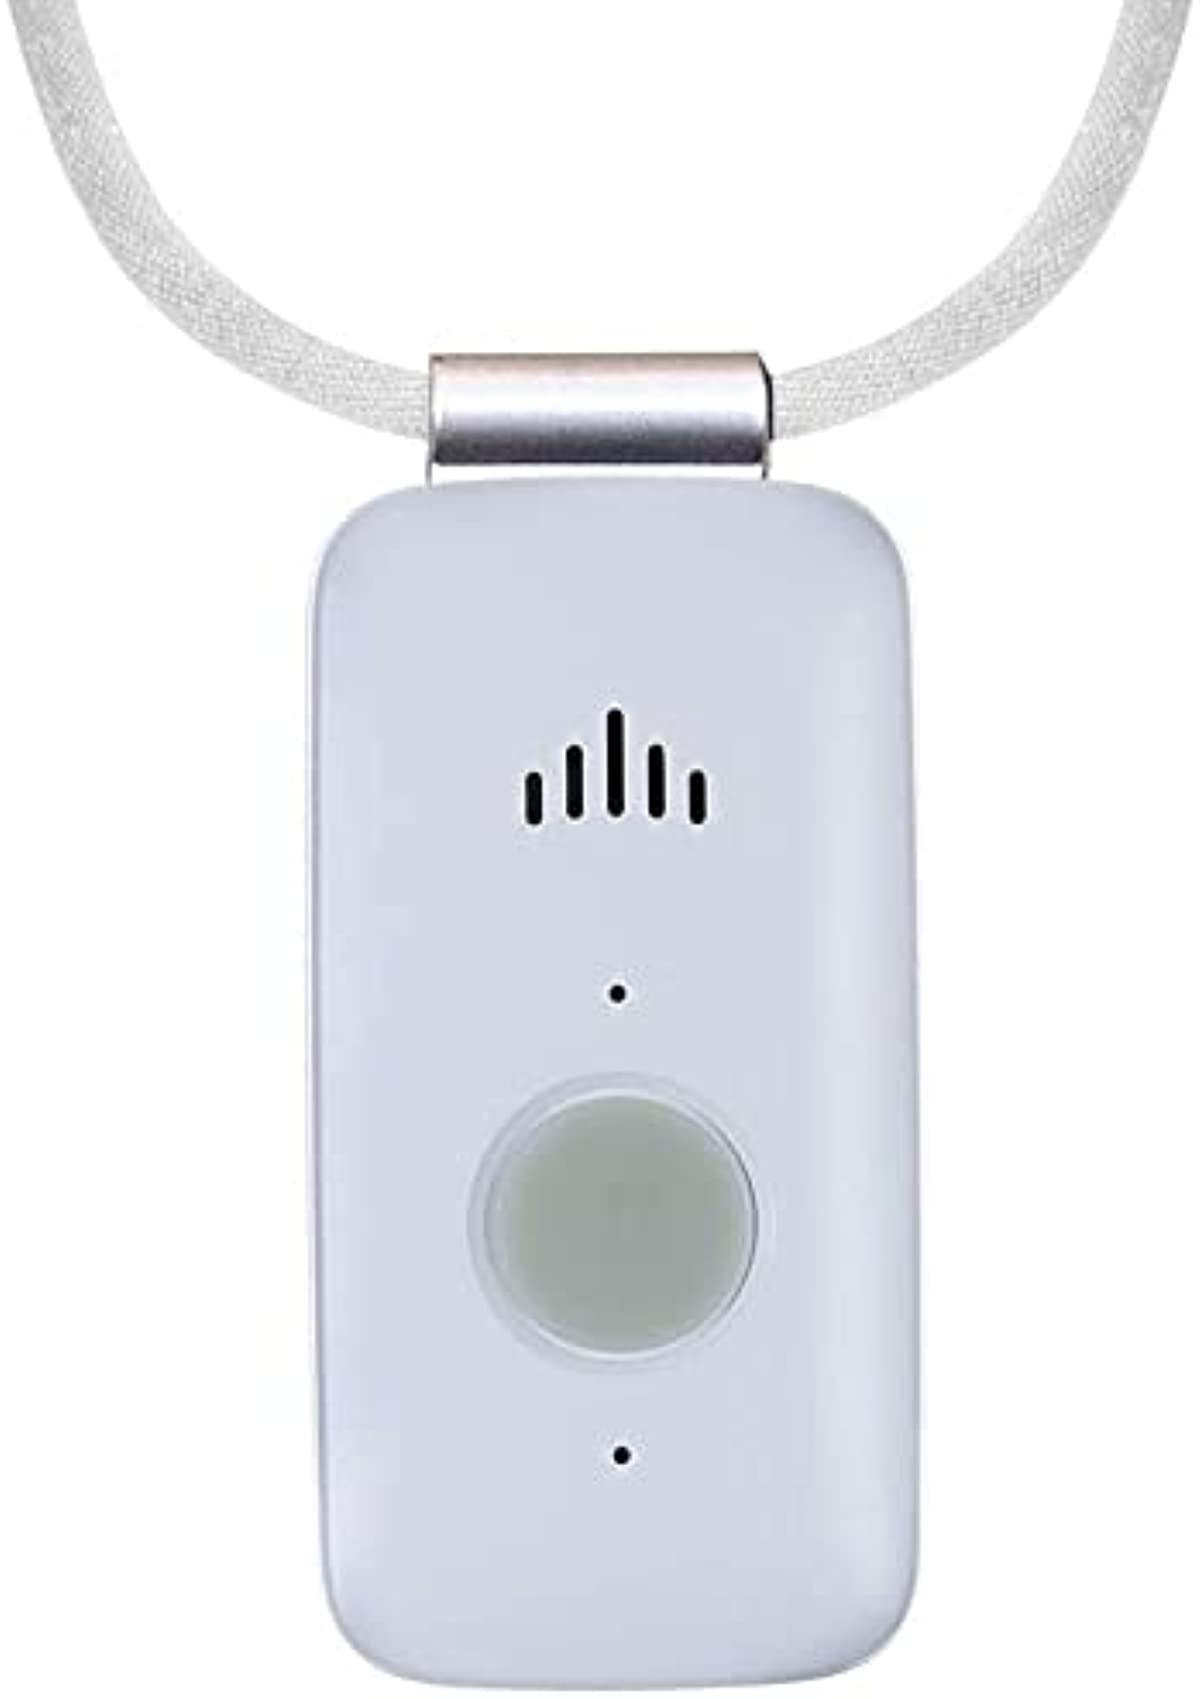 Mini Guardian - 4G Medical Alert System by Medical Guardian - Elderly Assistance Products, 24/7 Alert Button for Seniors - Smart Devices with Easy Button for Elderly Monitoring (White)